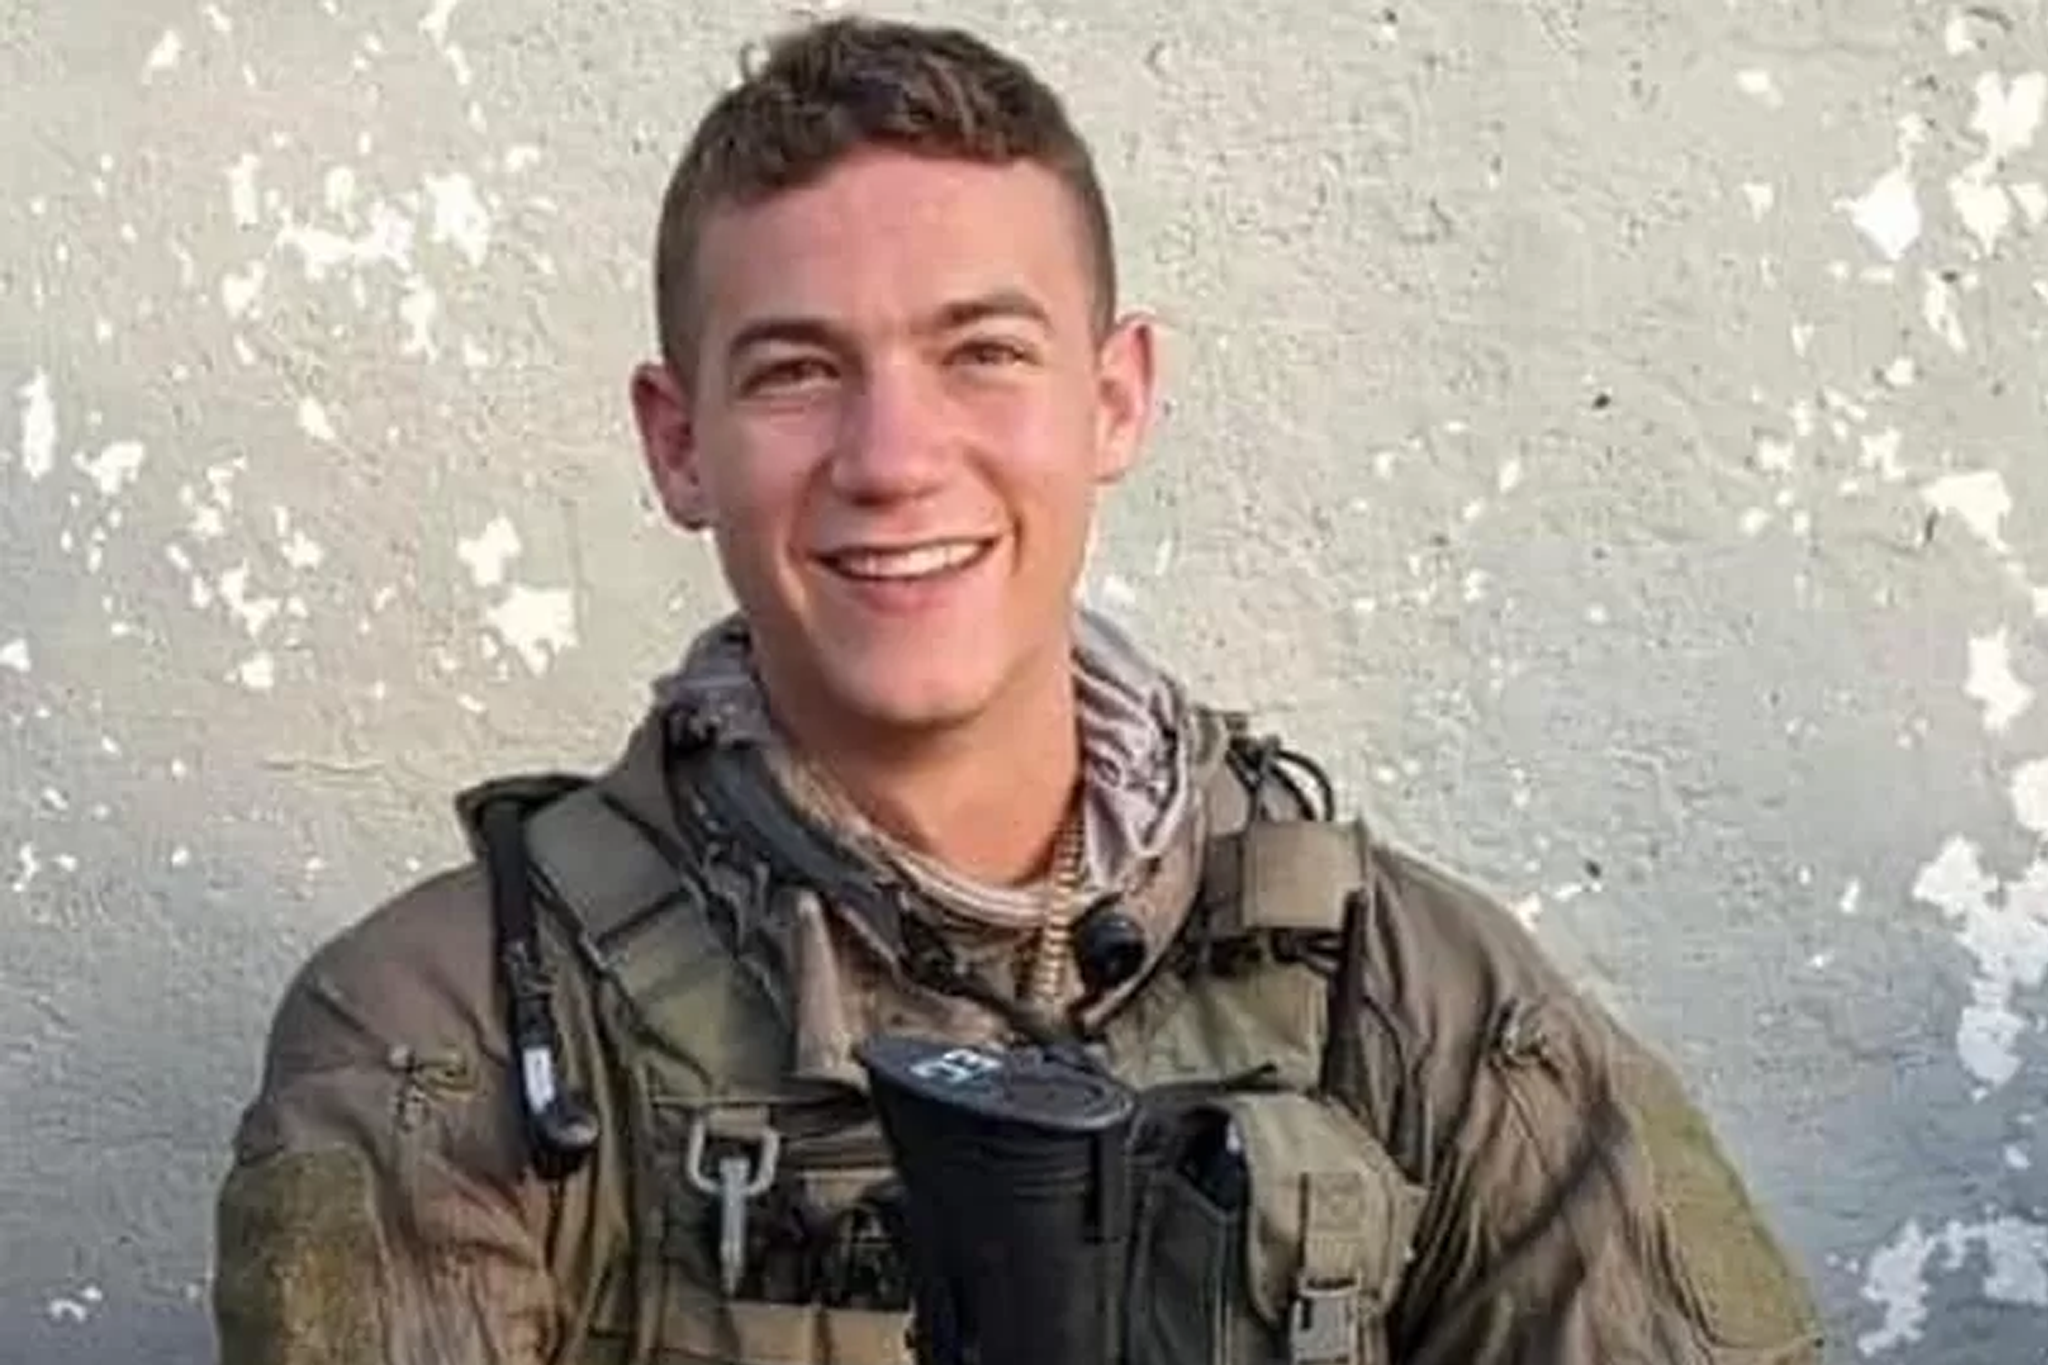 Yosef Guedalia, 22, a soldier in an anti-terror unit, was killed when the militants attacked Kibbutz Kfar Aza on 7 October, according to reports